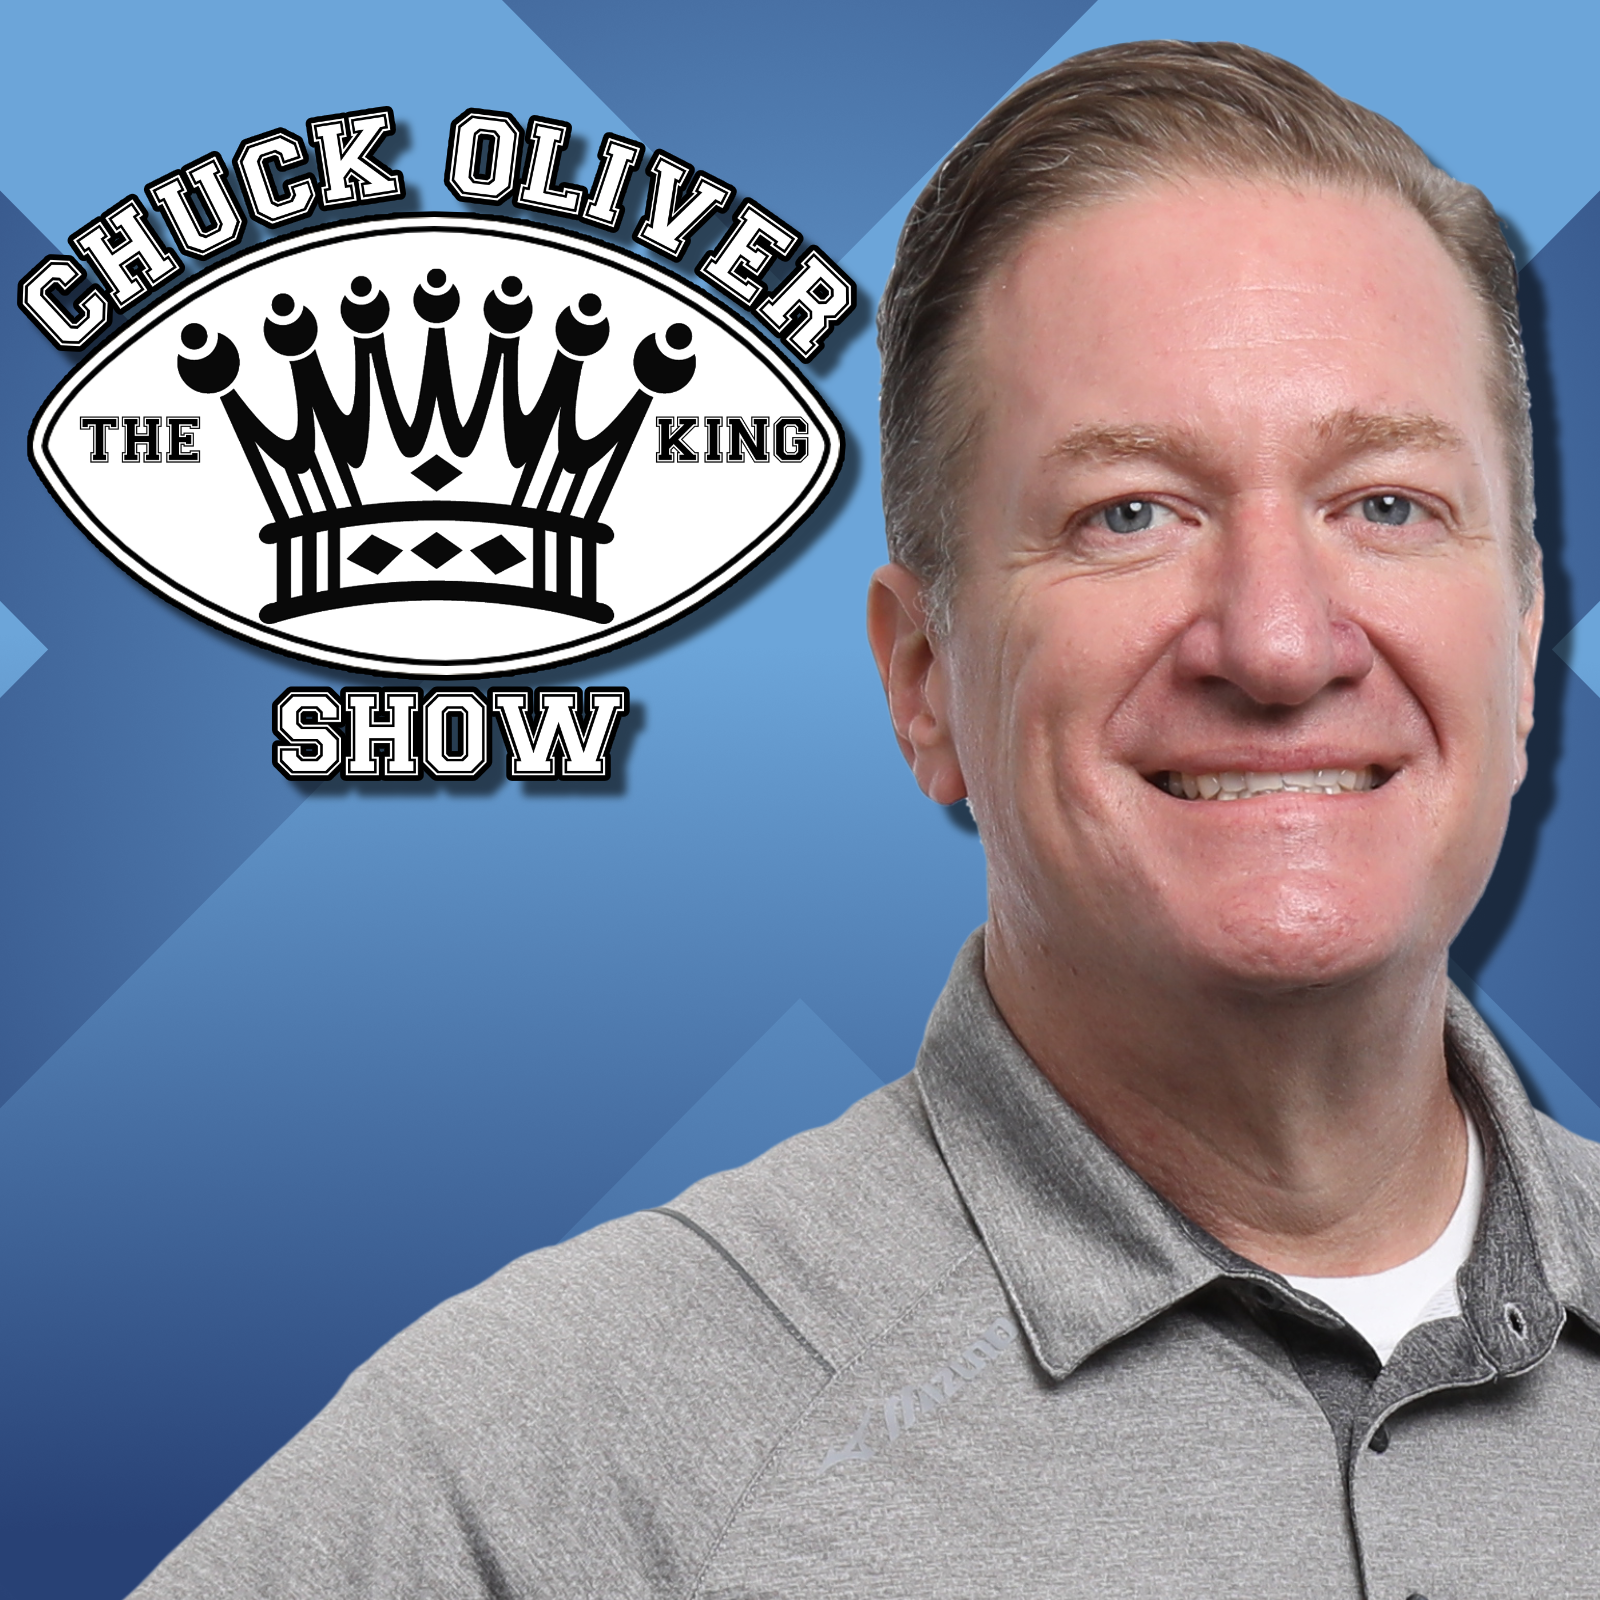 CHUCK OLIVER SHOW 5-3 FRIDAY HOUR 1